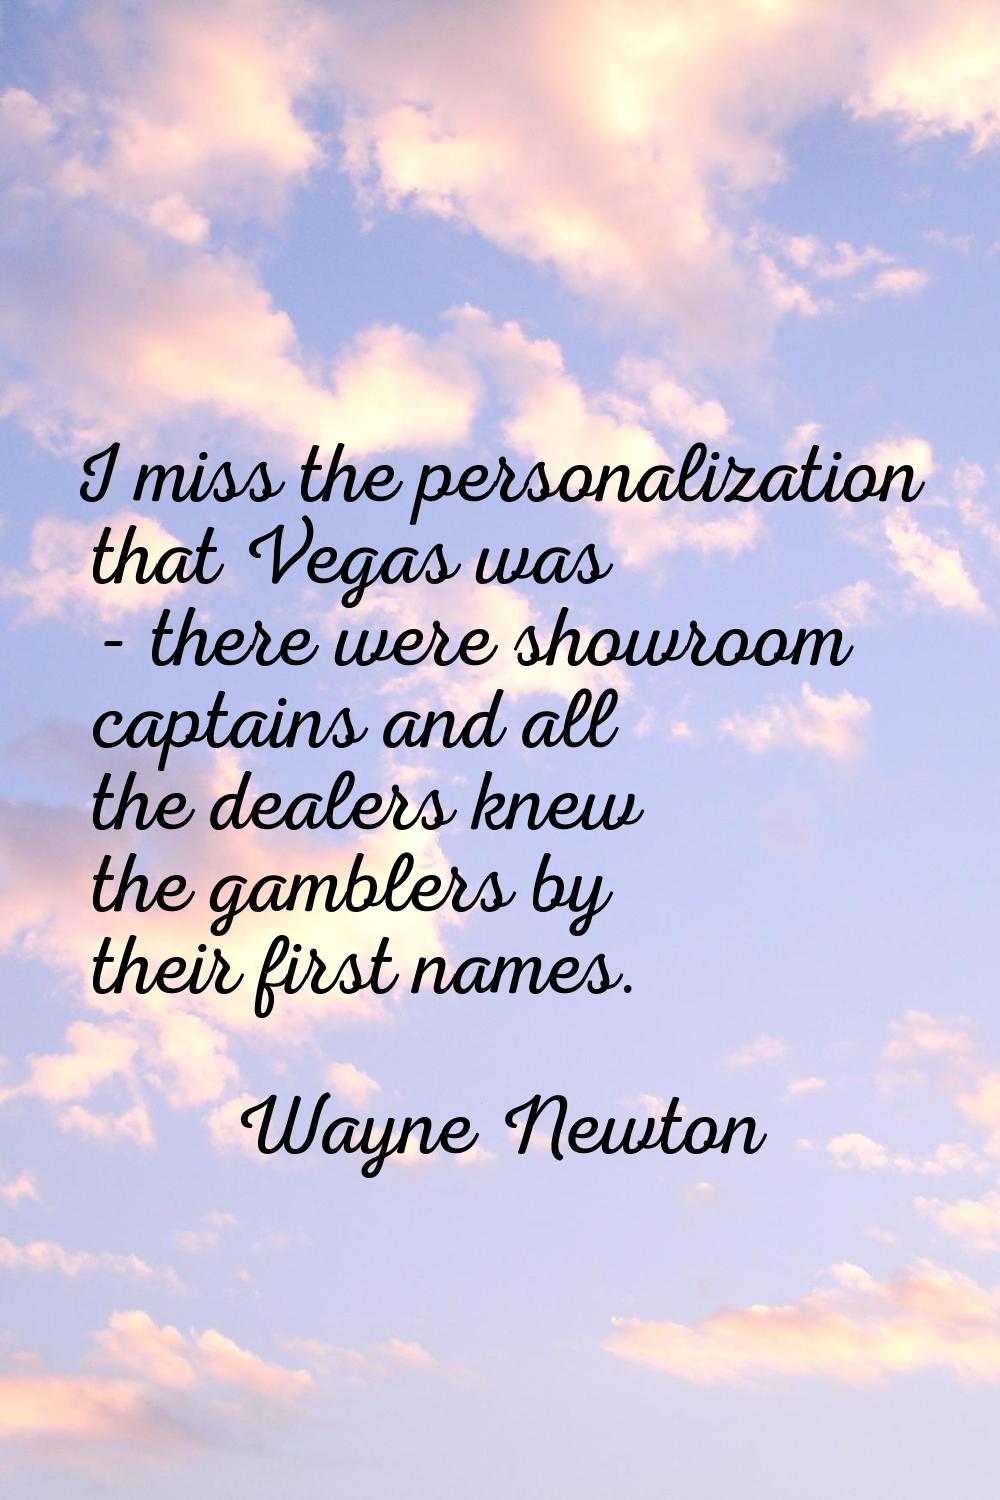 I miss the personalization that Vegas was - there were showroom captains and all the dealers knew t